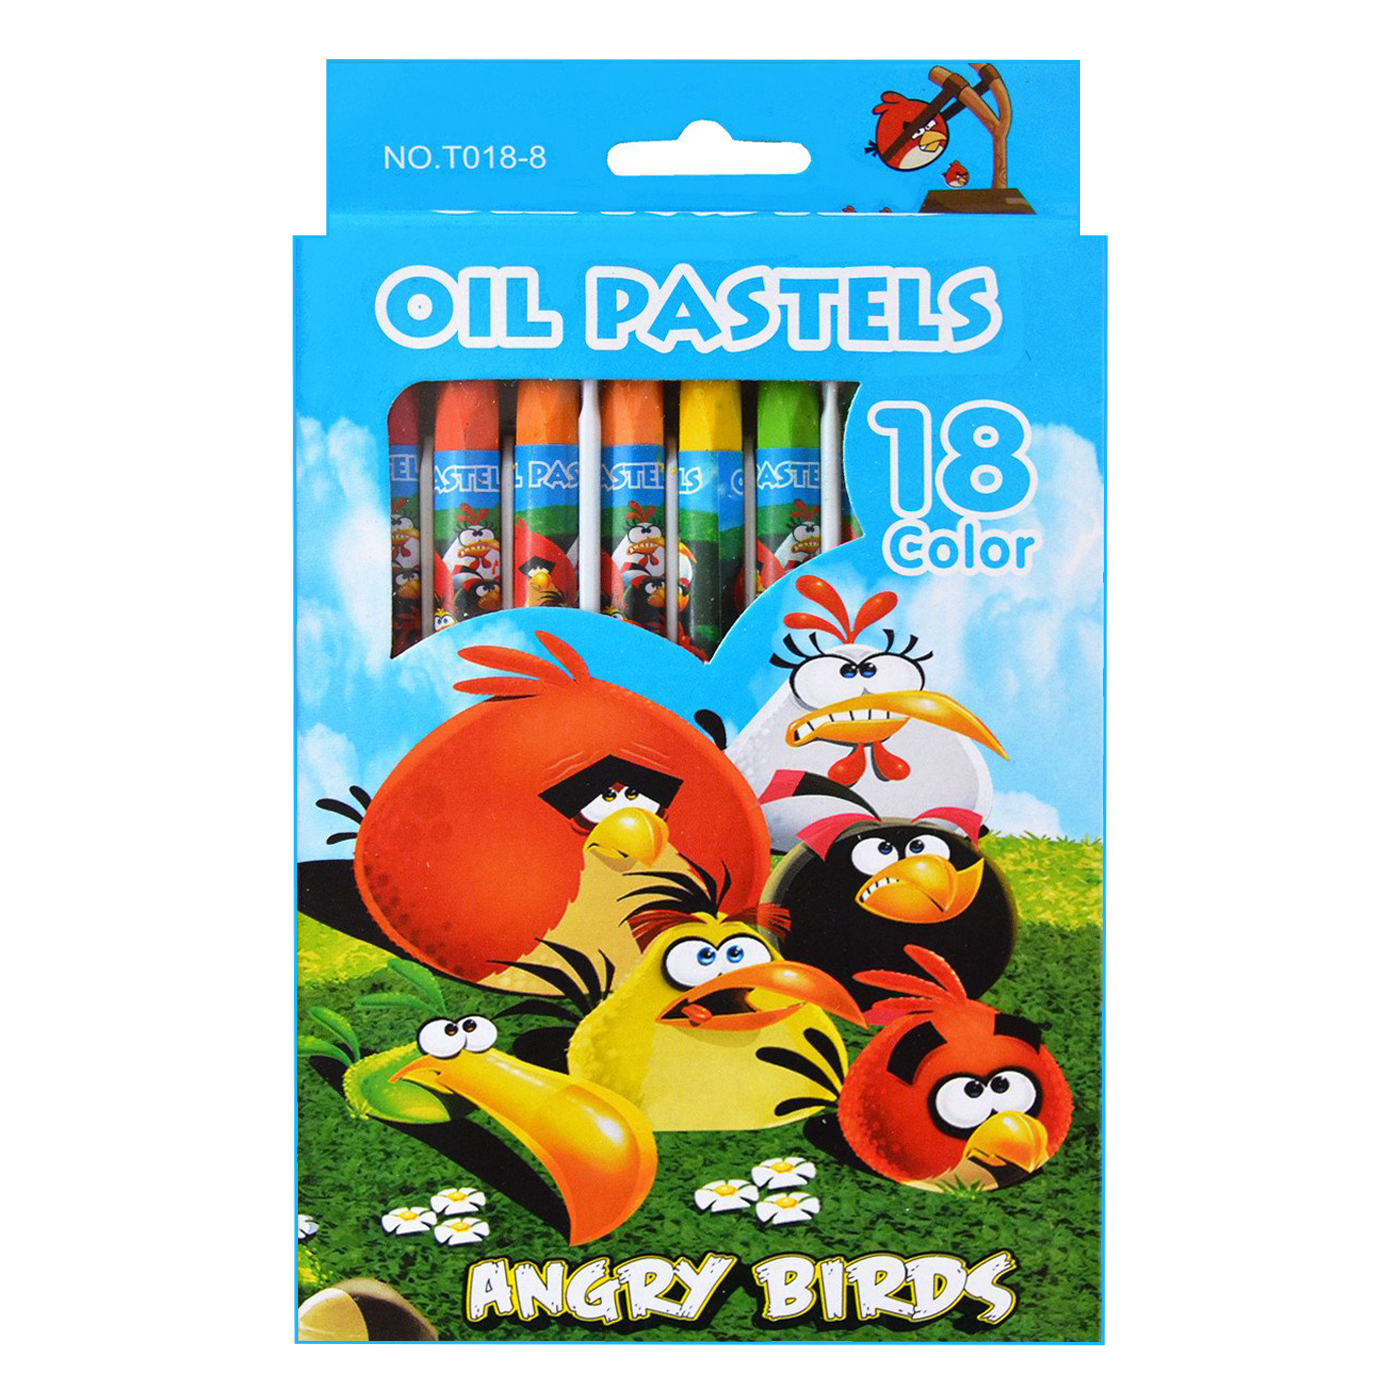 Angry Birds Oil Pastels 18 Shades